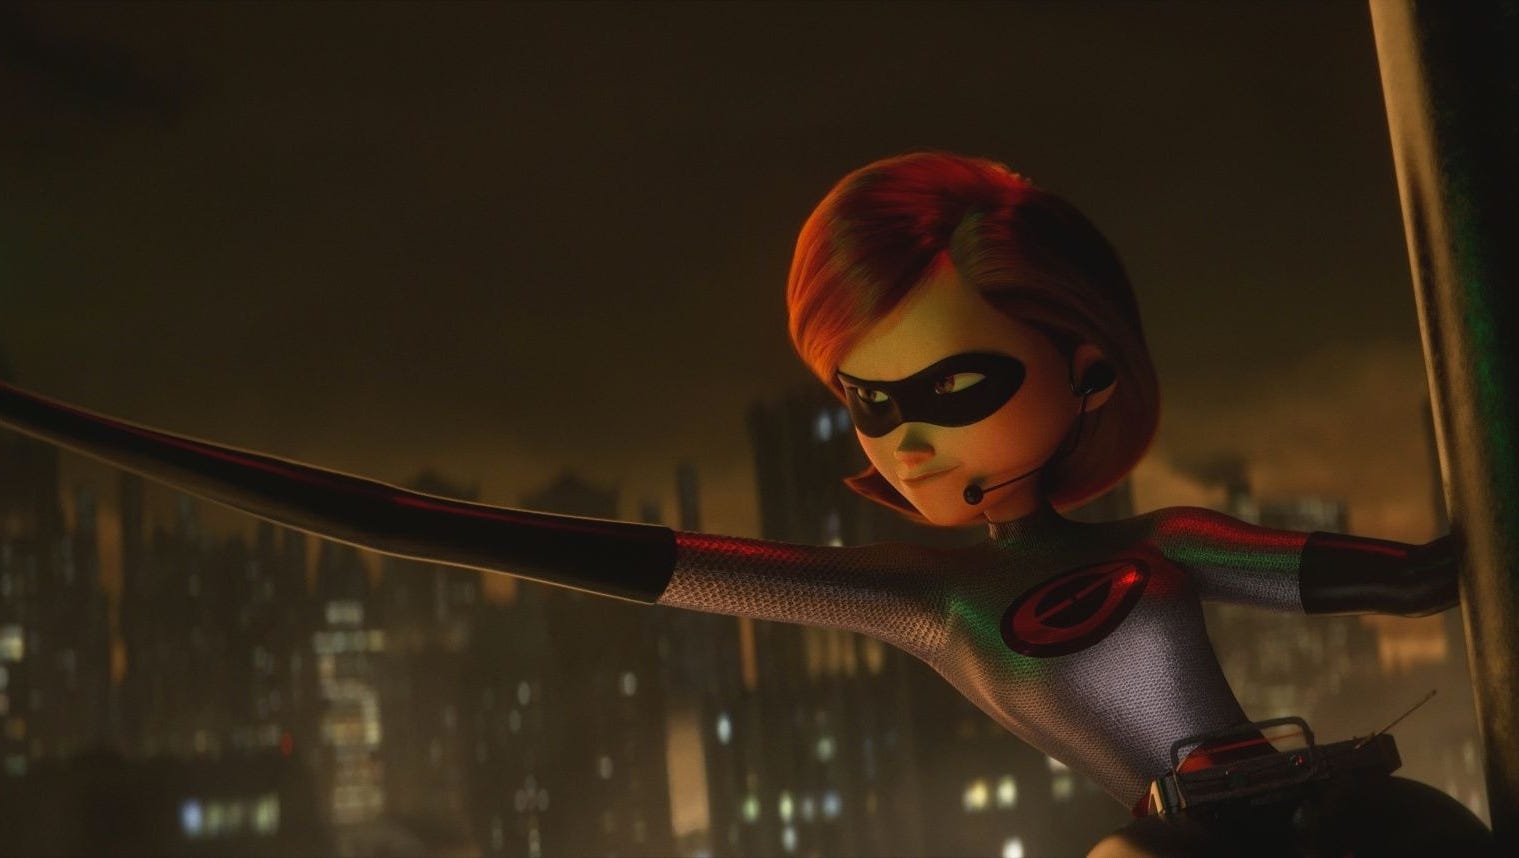 Elastigirl extends herself to take on primary